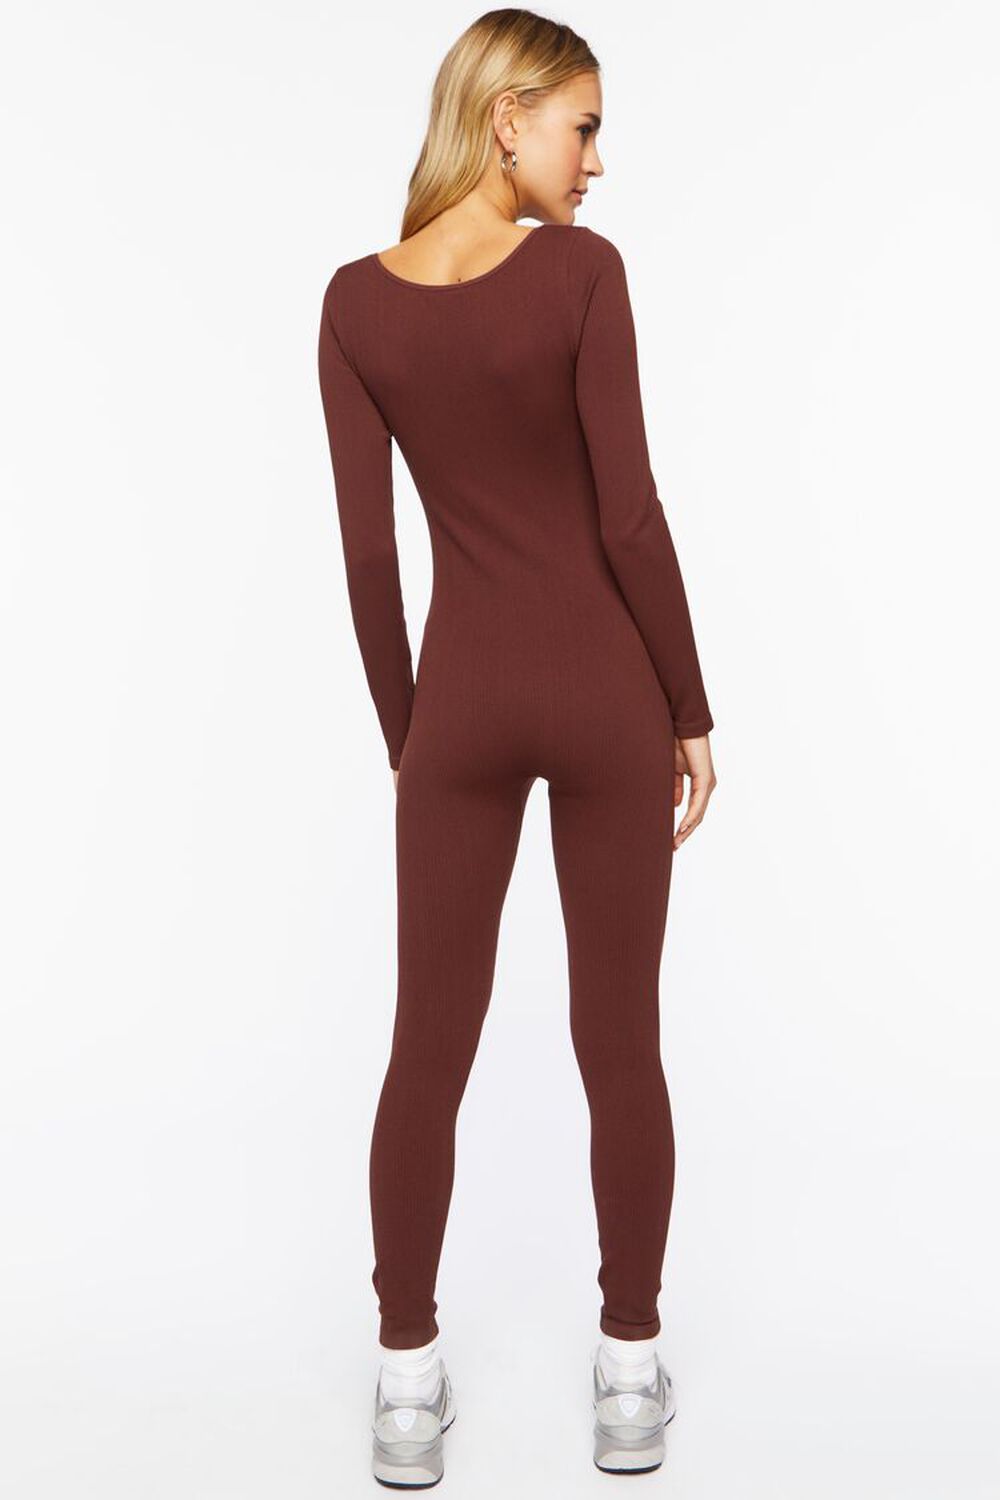 BROWN Seamless Ribbed Jumpsuit, image 3